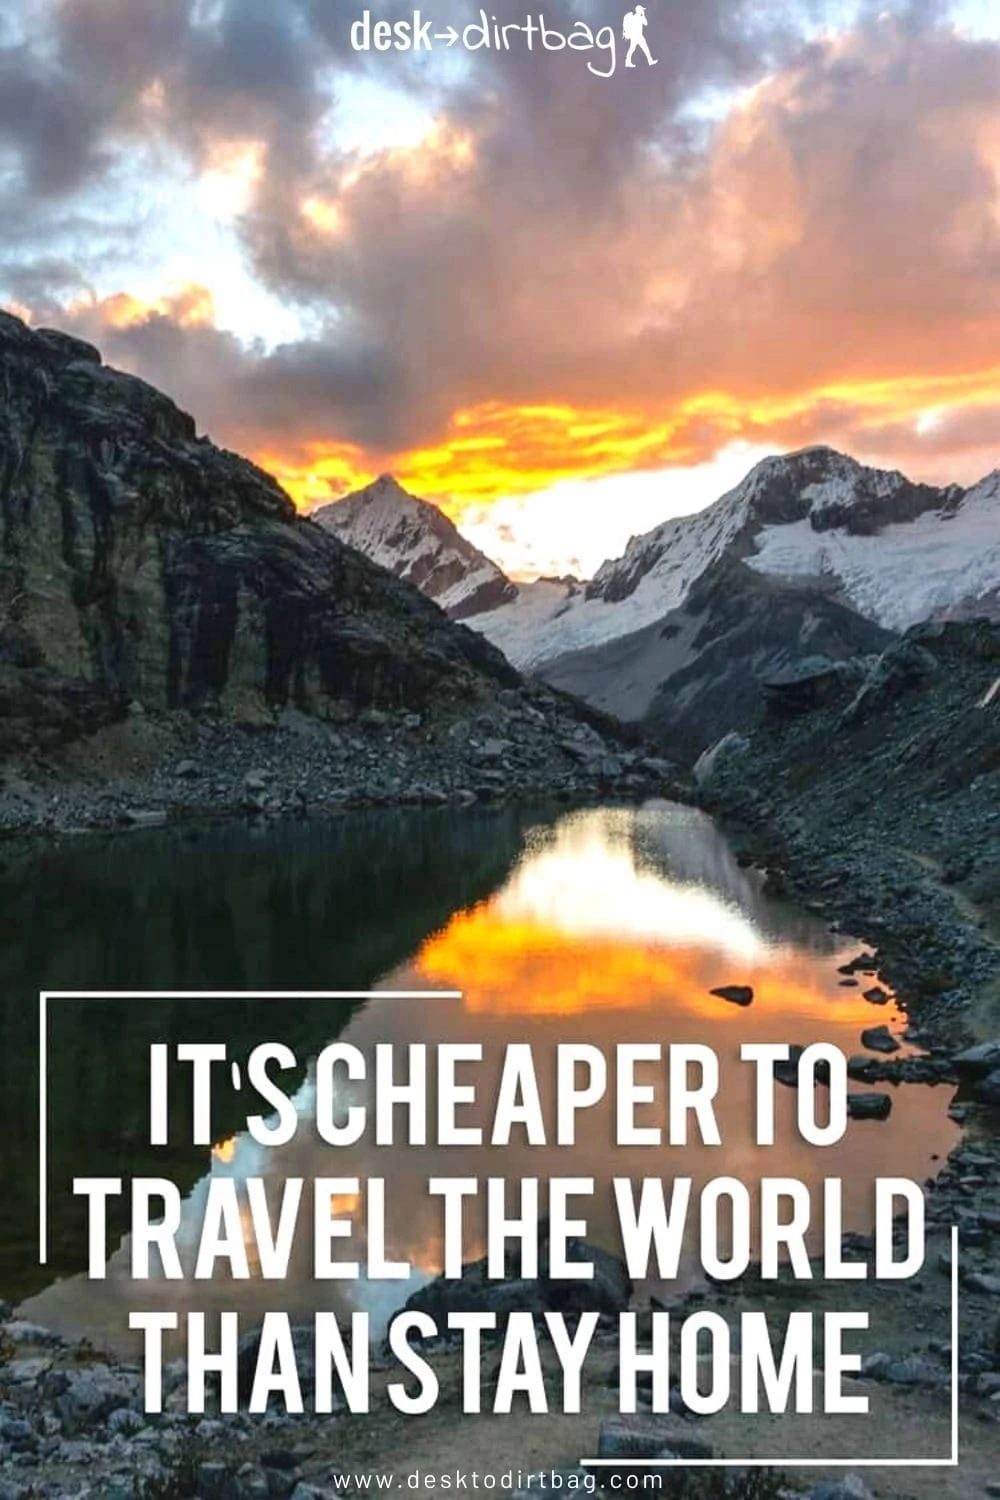 How Much Does it Cost to Travel the World? travel-hacking, travel, peru, how-to, expense-reports